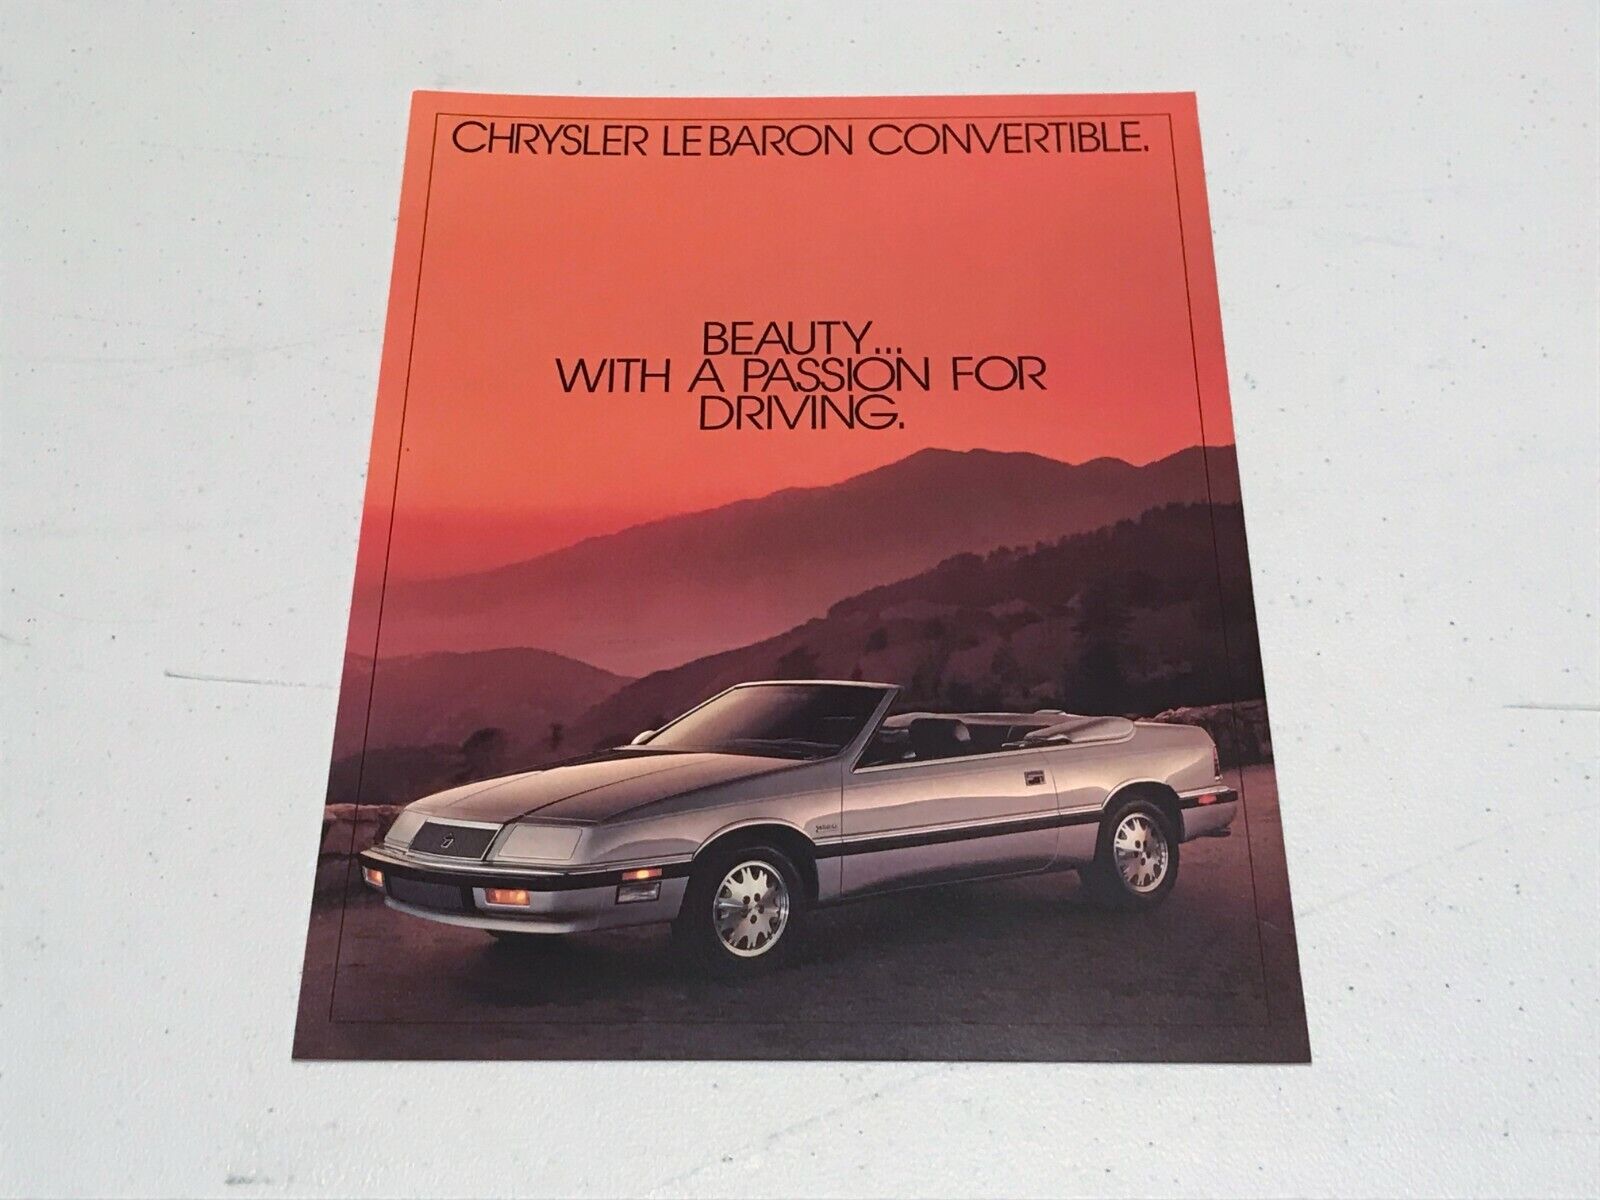 1987 CHRYSLER LEBARON CONVERTIBLE SALES BROCHURE IN EXCELLENT CONDITION